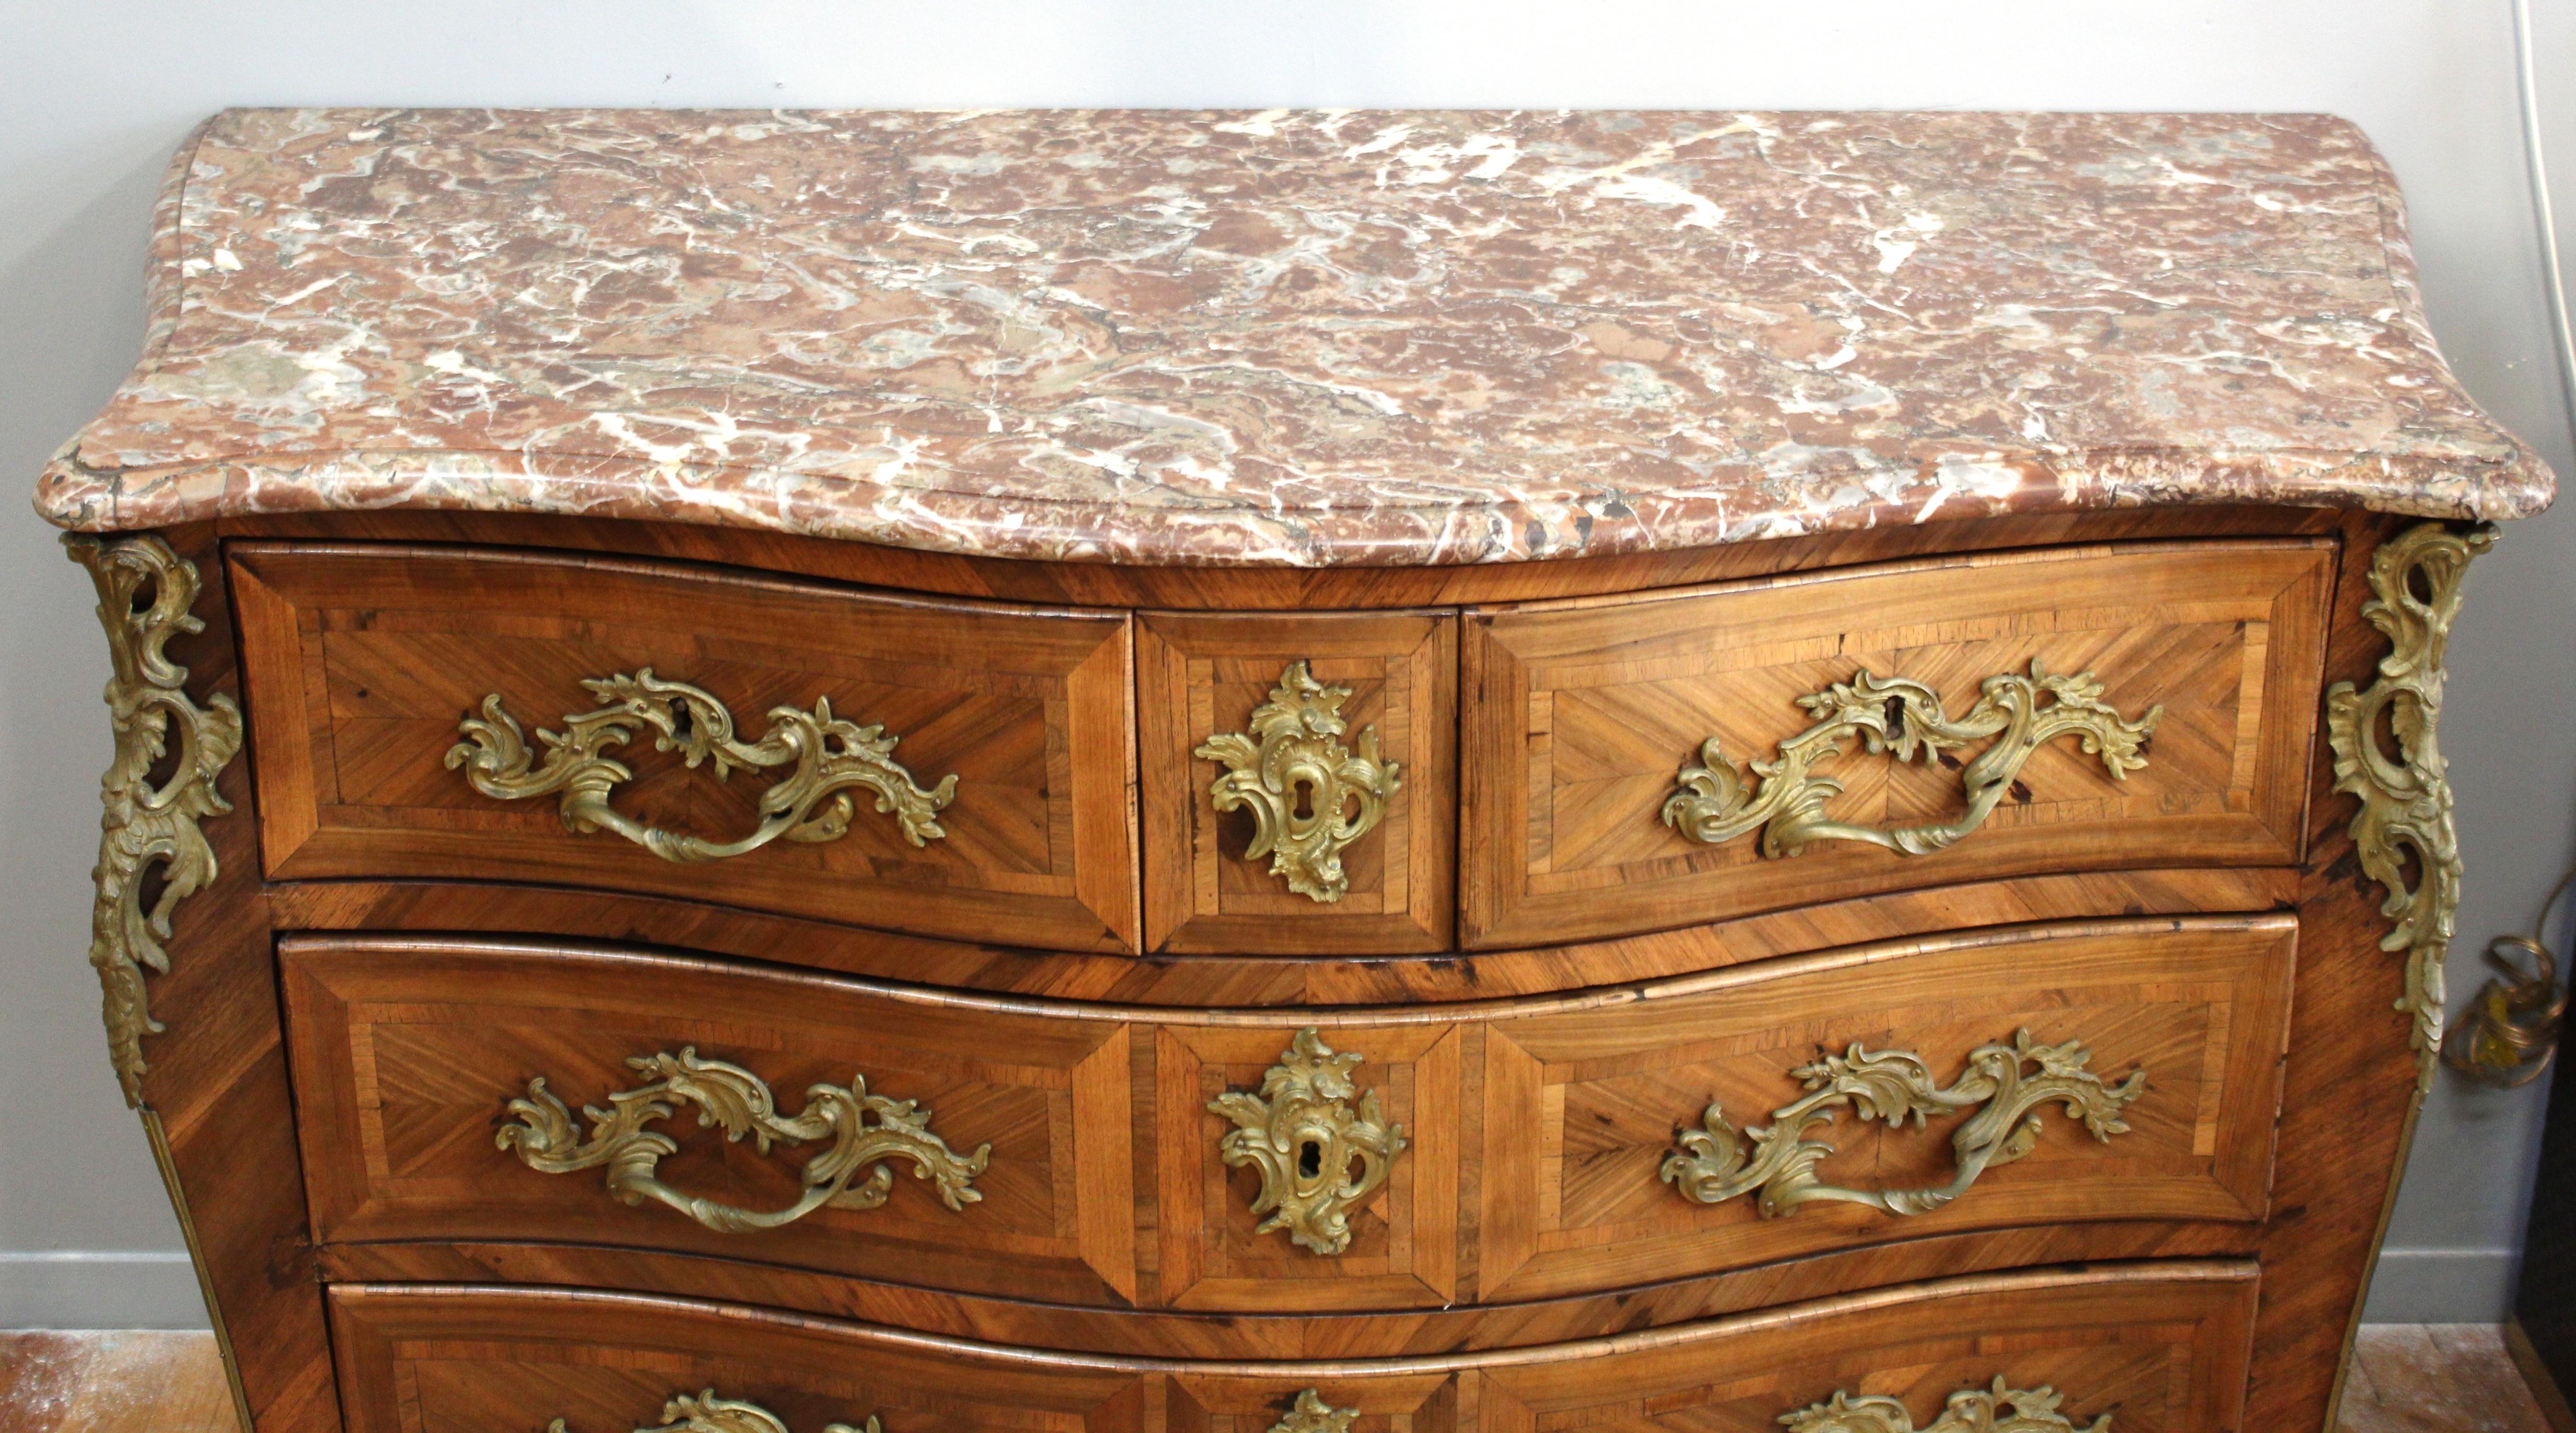 French Louis XV period commode a tombeau or serpentine chest of drawers with marble top, made by French cabinetmaker Jean Demoulin during the 1770s.
The commode is made with veneered kingwood with gilt bronze embellishments, keyholes and handles